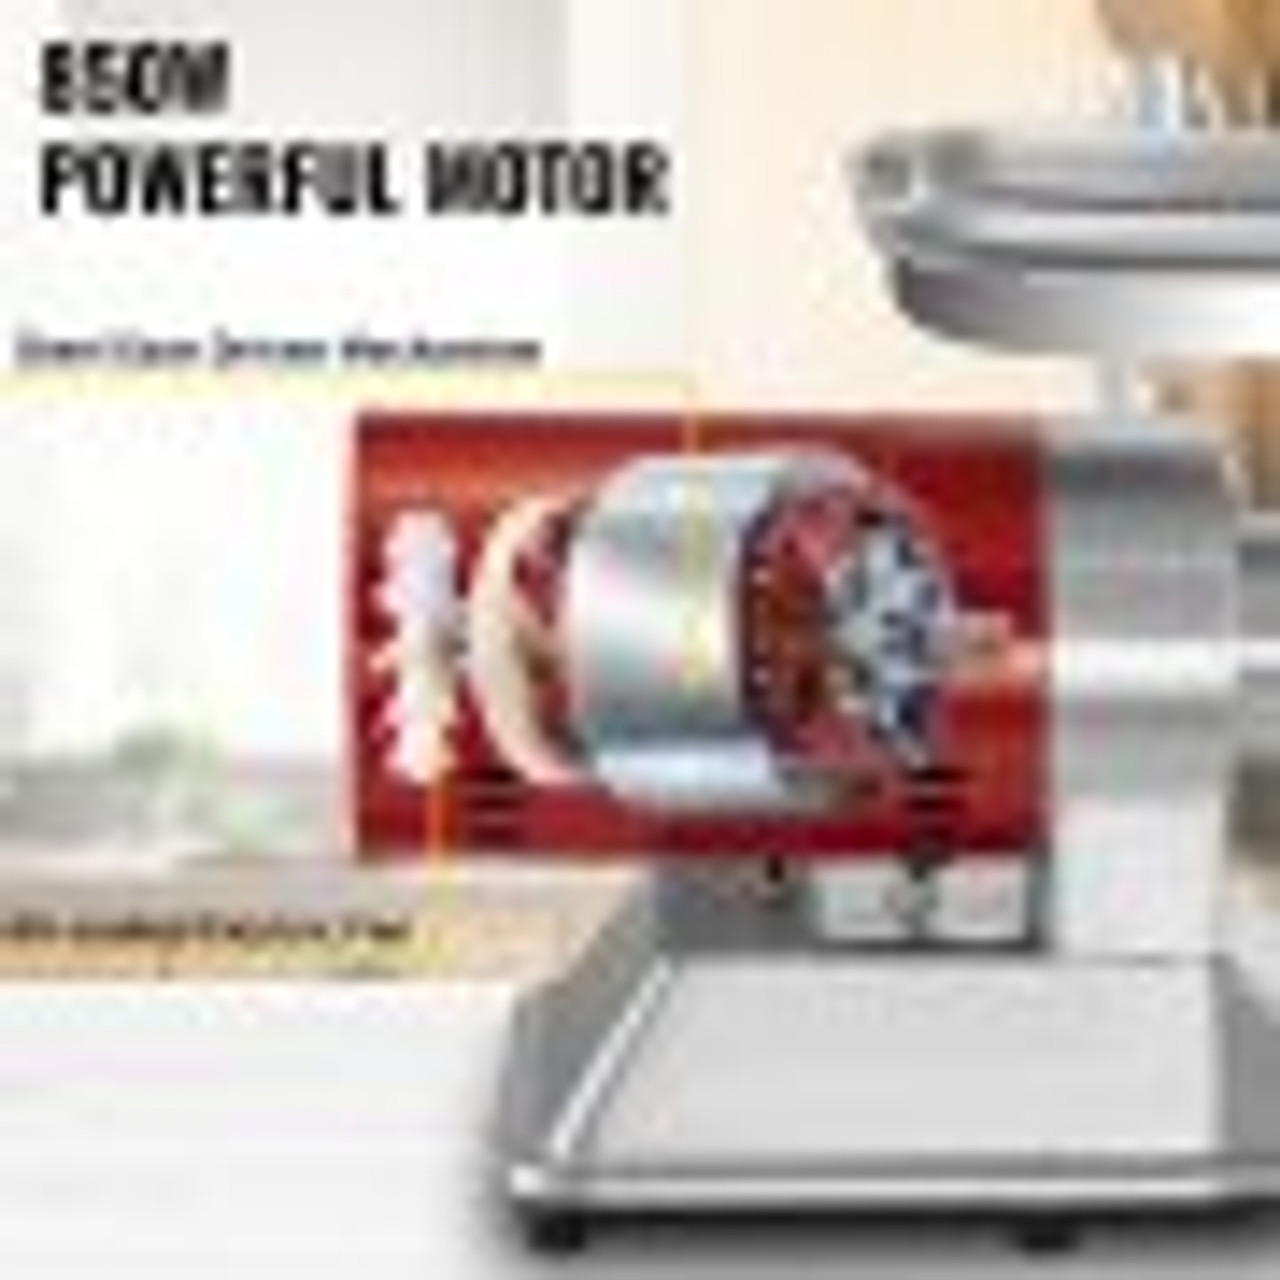 Electric Meat Grinder, 551 Lbs/Hour 850W Meat Grinder Machine, 1.16 HP  Electric Meat Mincer with